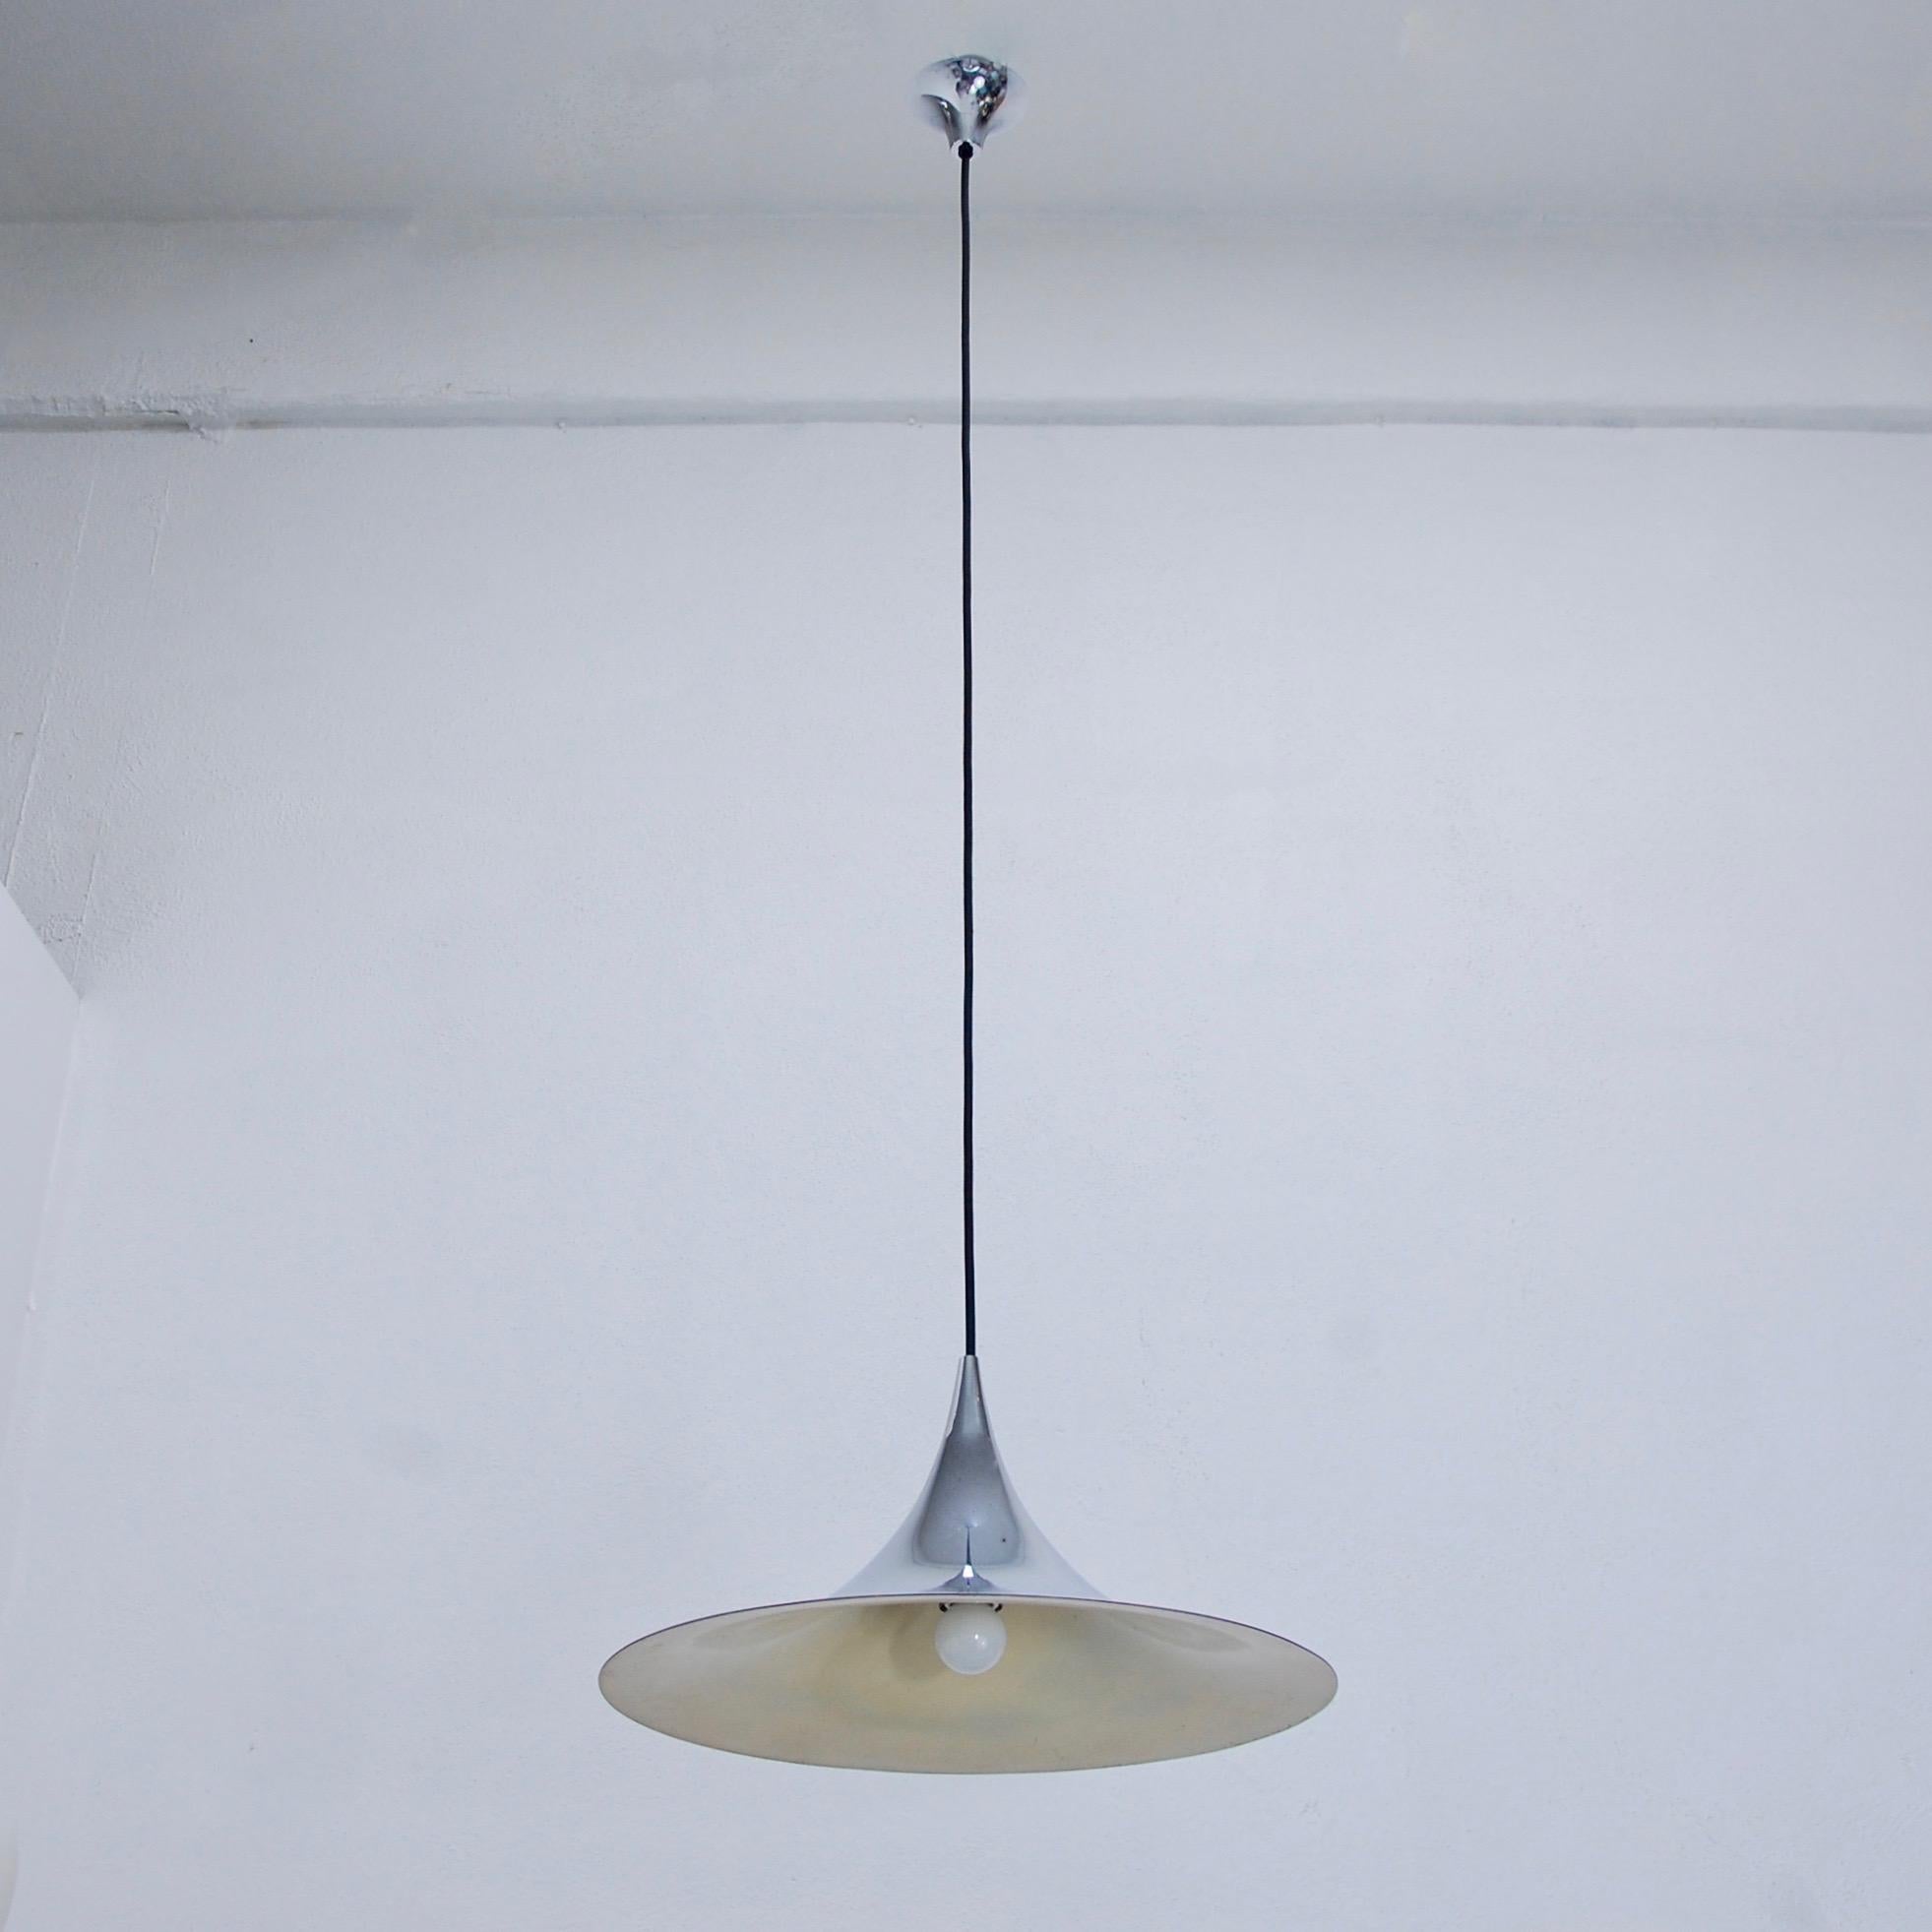 Nickle plated Fog and Morup Style Pendant from Denmark. Original finish. Wired with a single E26 medium based socket for the US. Light bulb included. Overall drop adjustable upon request.
Measurements:
OAD: 48”
Fixture Height: 10”
Diameter: 20”
    